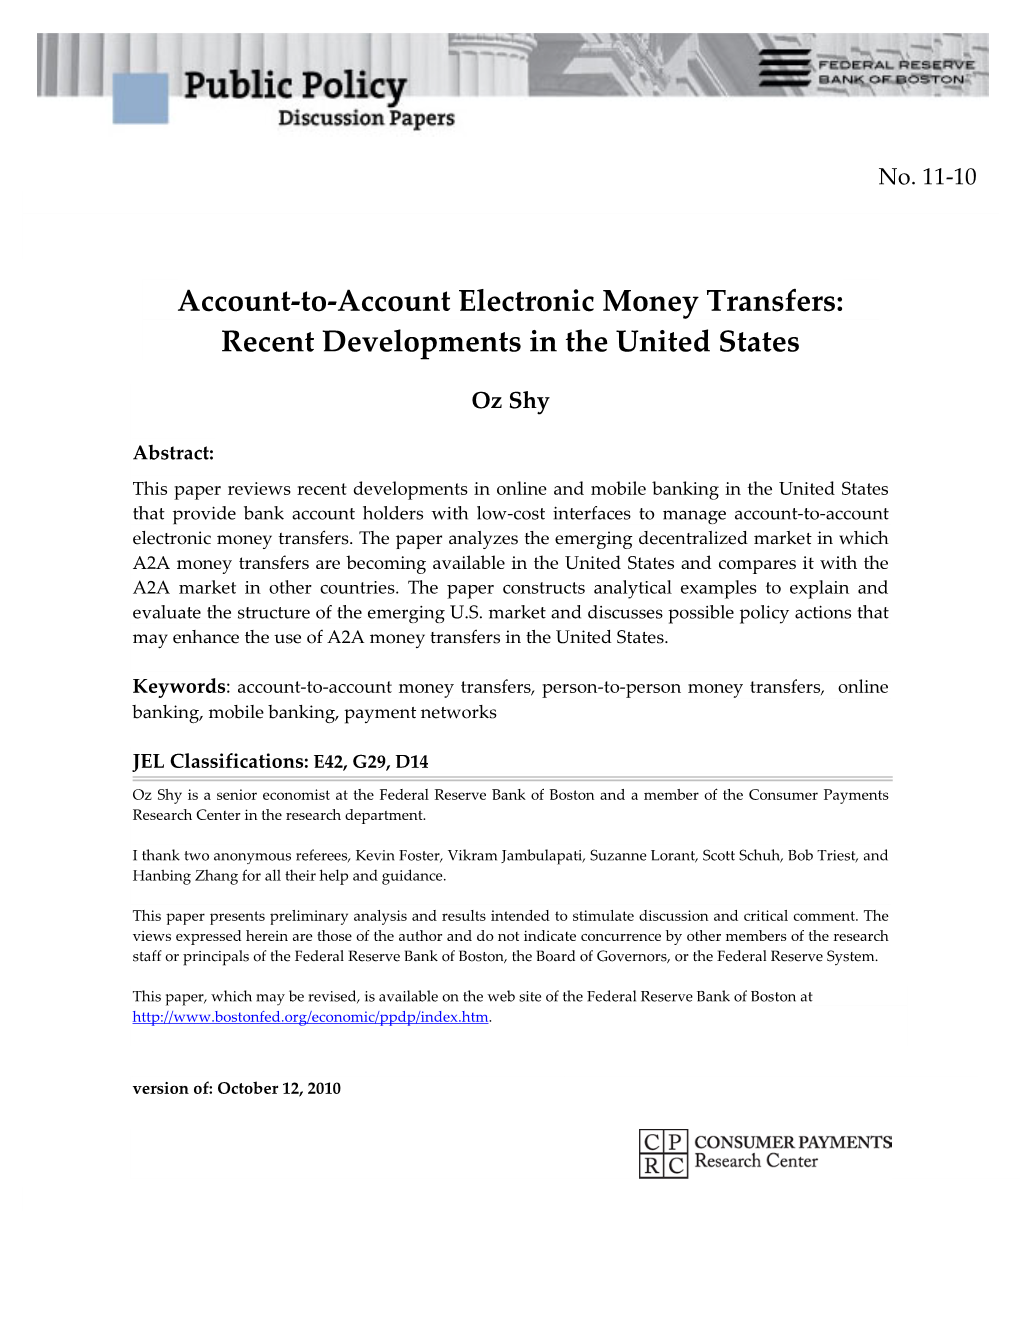 Account-To-Account Electronic Money Transfers: Recent Developments in the United States